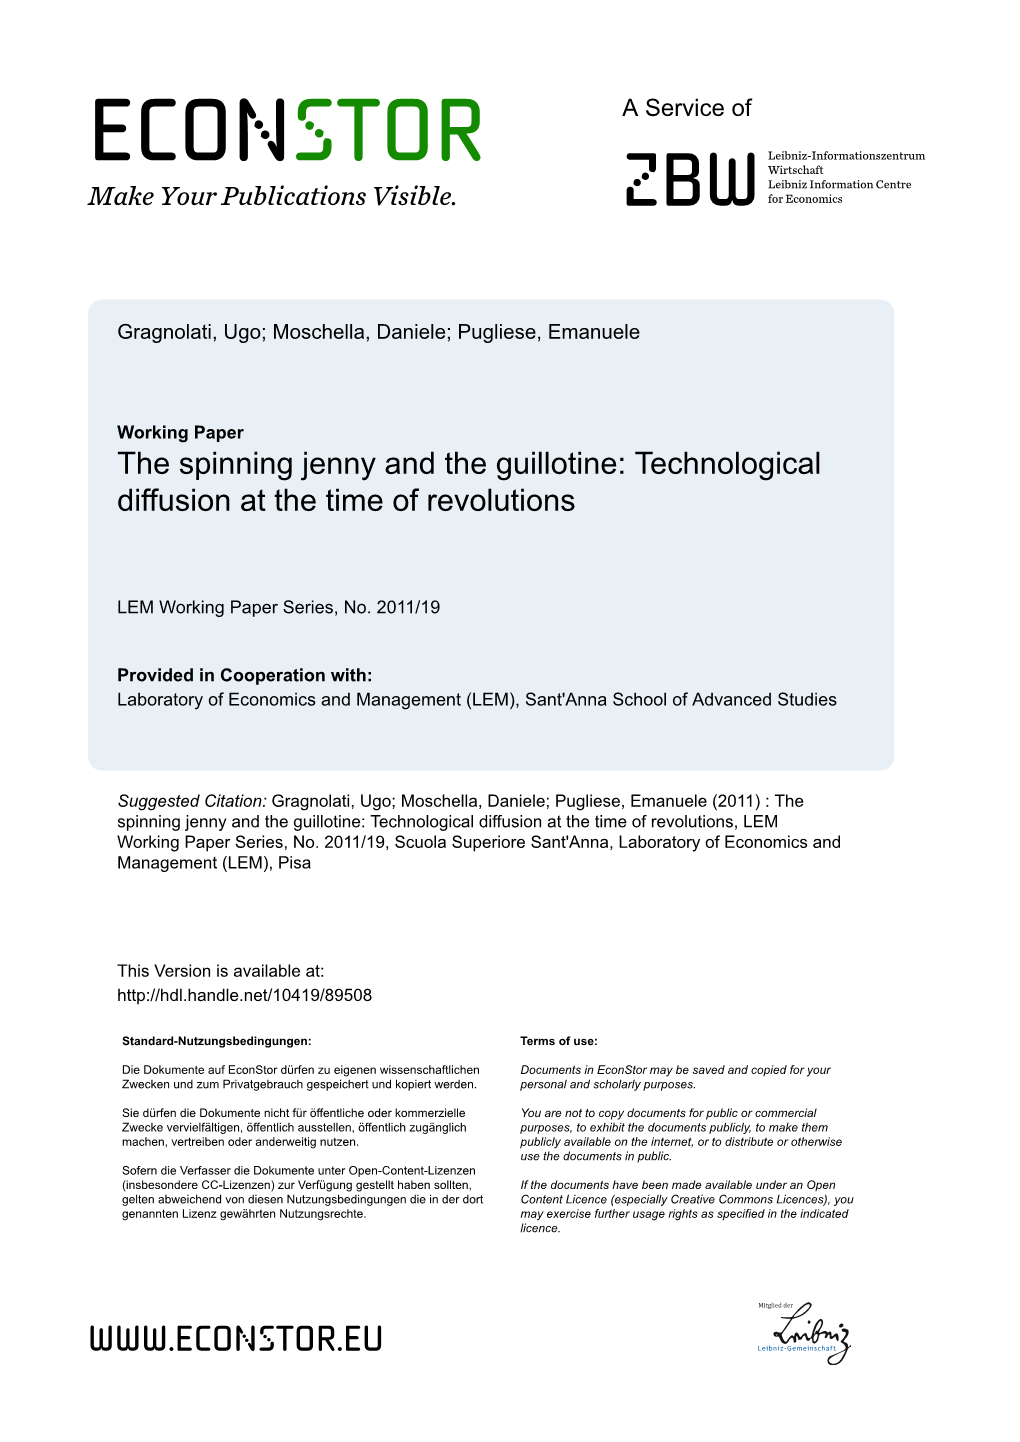 The Spinning Jenny and the Guillotine: Technological Diffusion at the Time of Revolutions